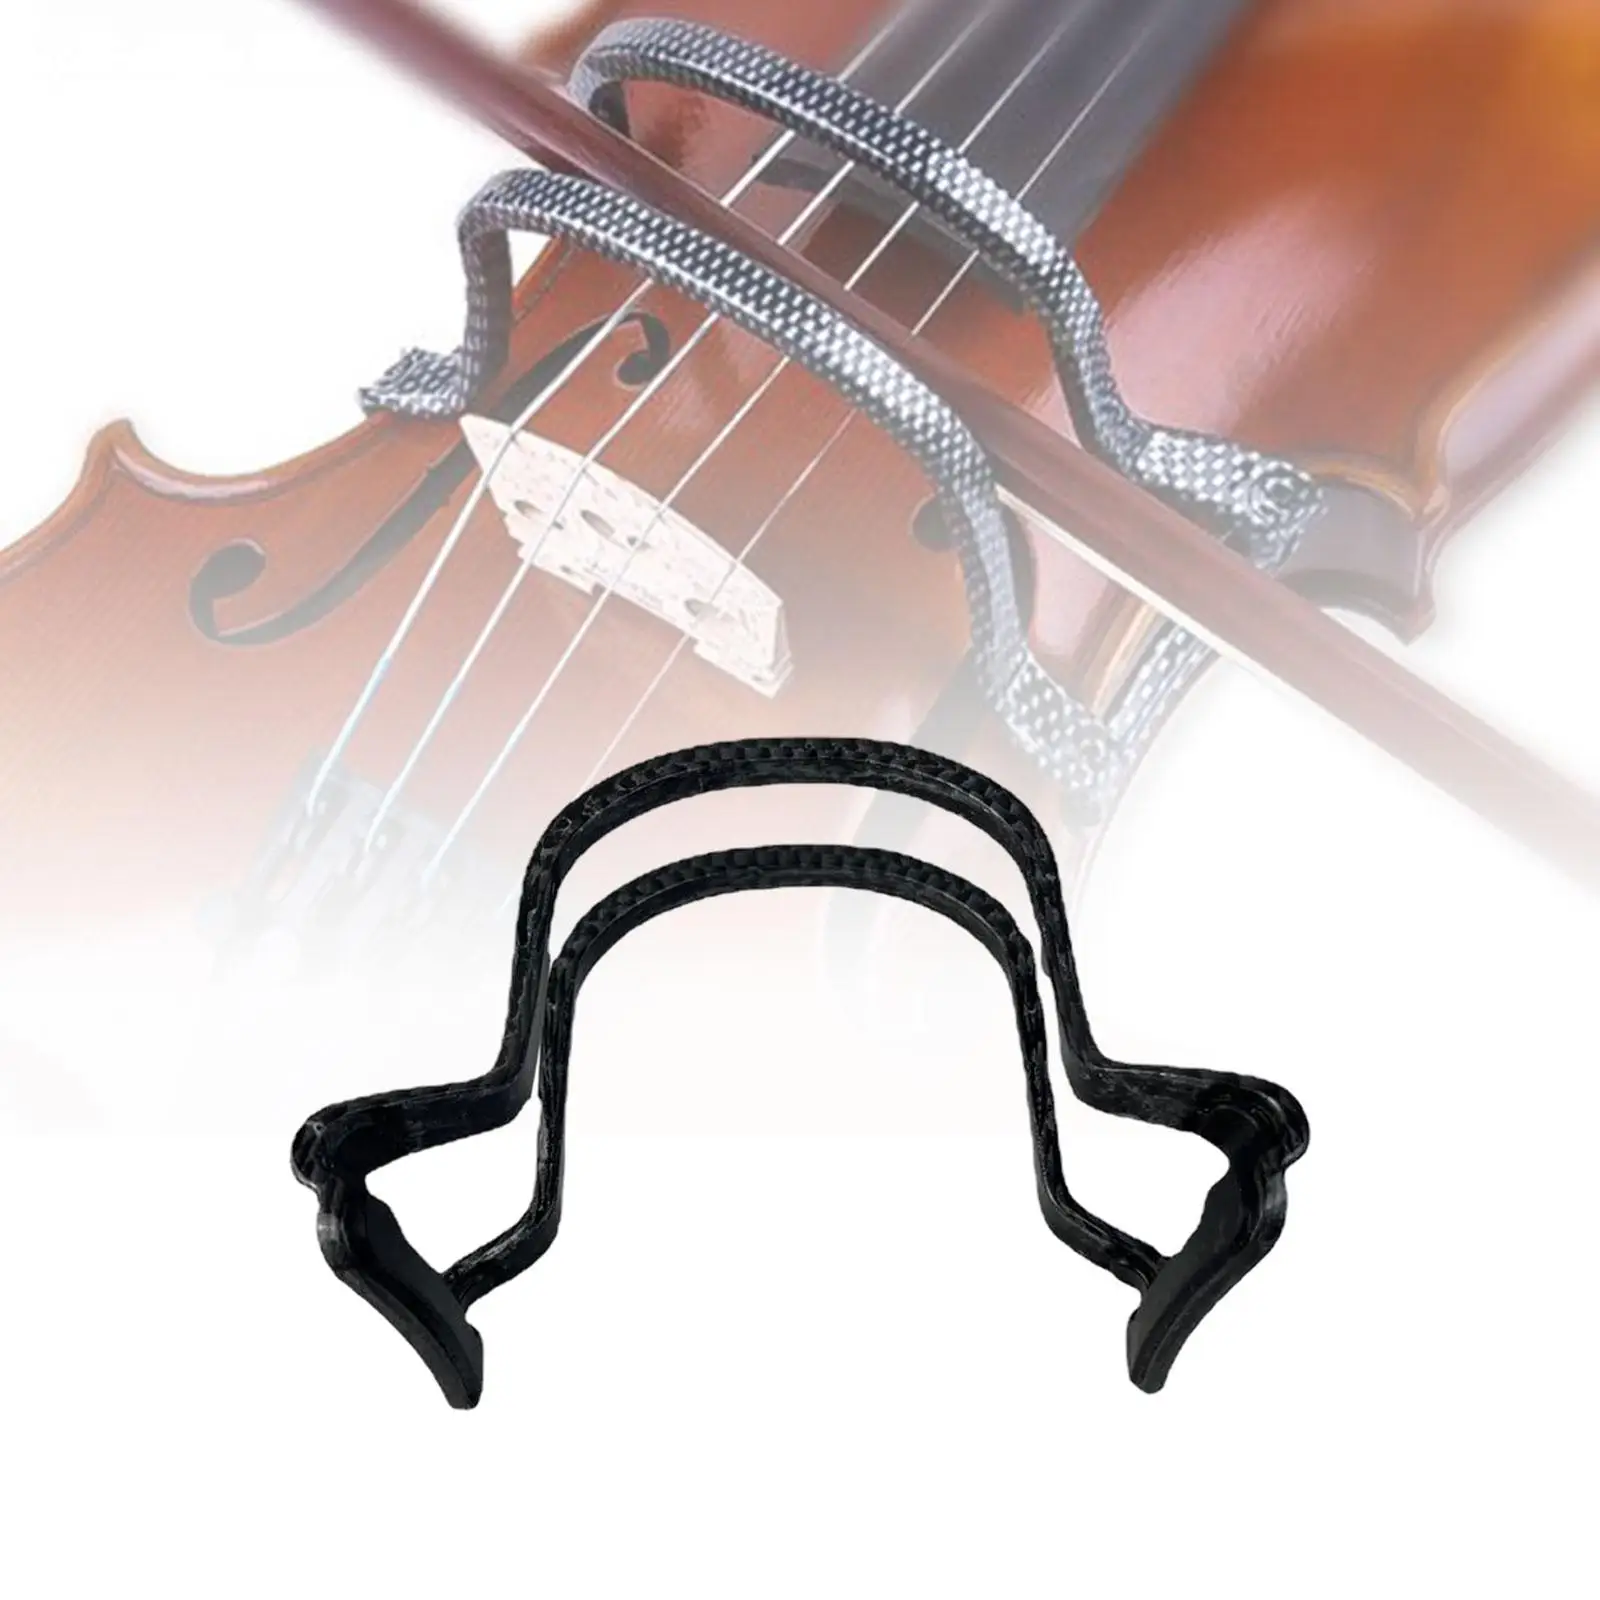 Violin Bow Straighten Guide Corrector Training Accessories Fiddle Practice Finger Correction Practice for 4/4 3/4 1/2 Violin